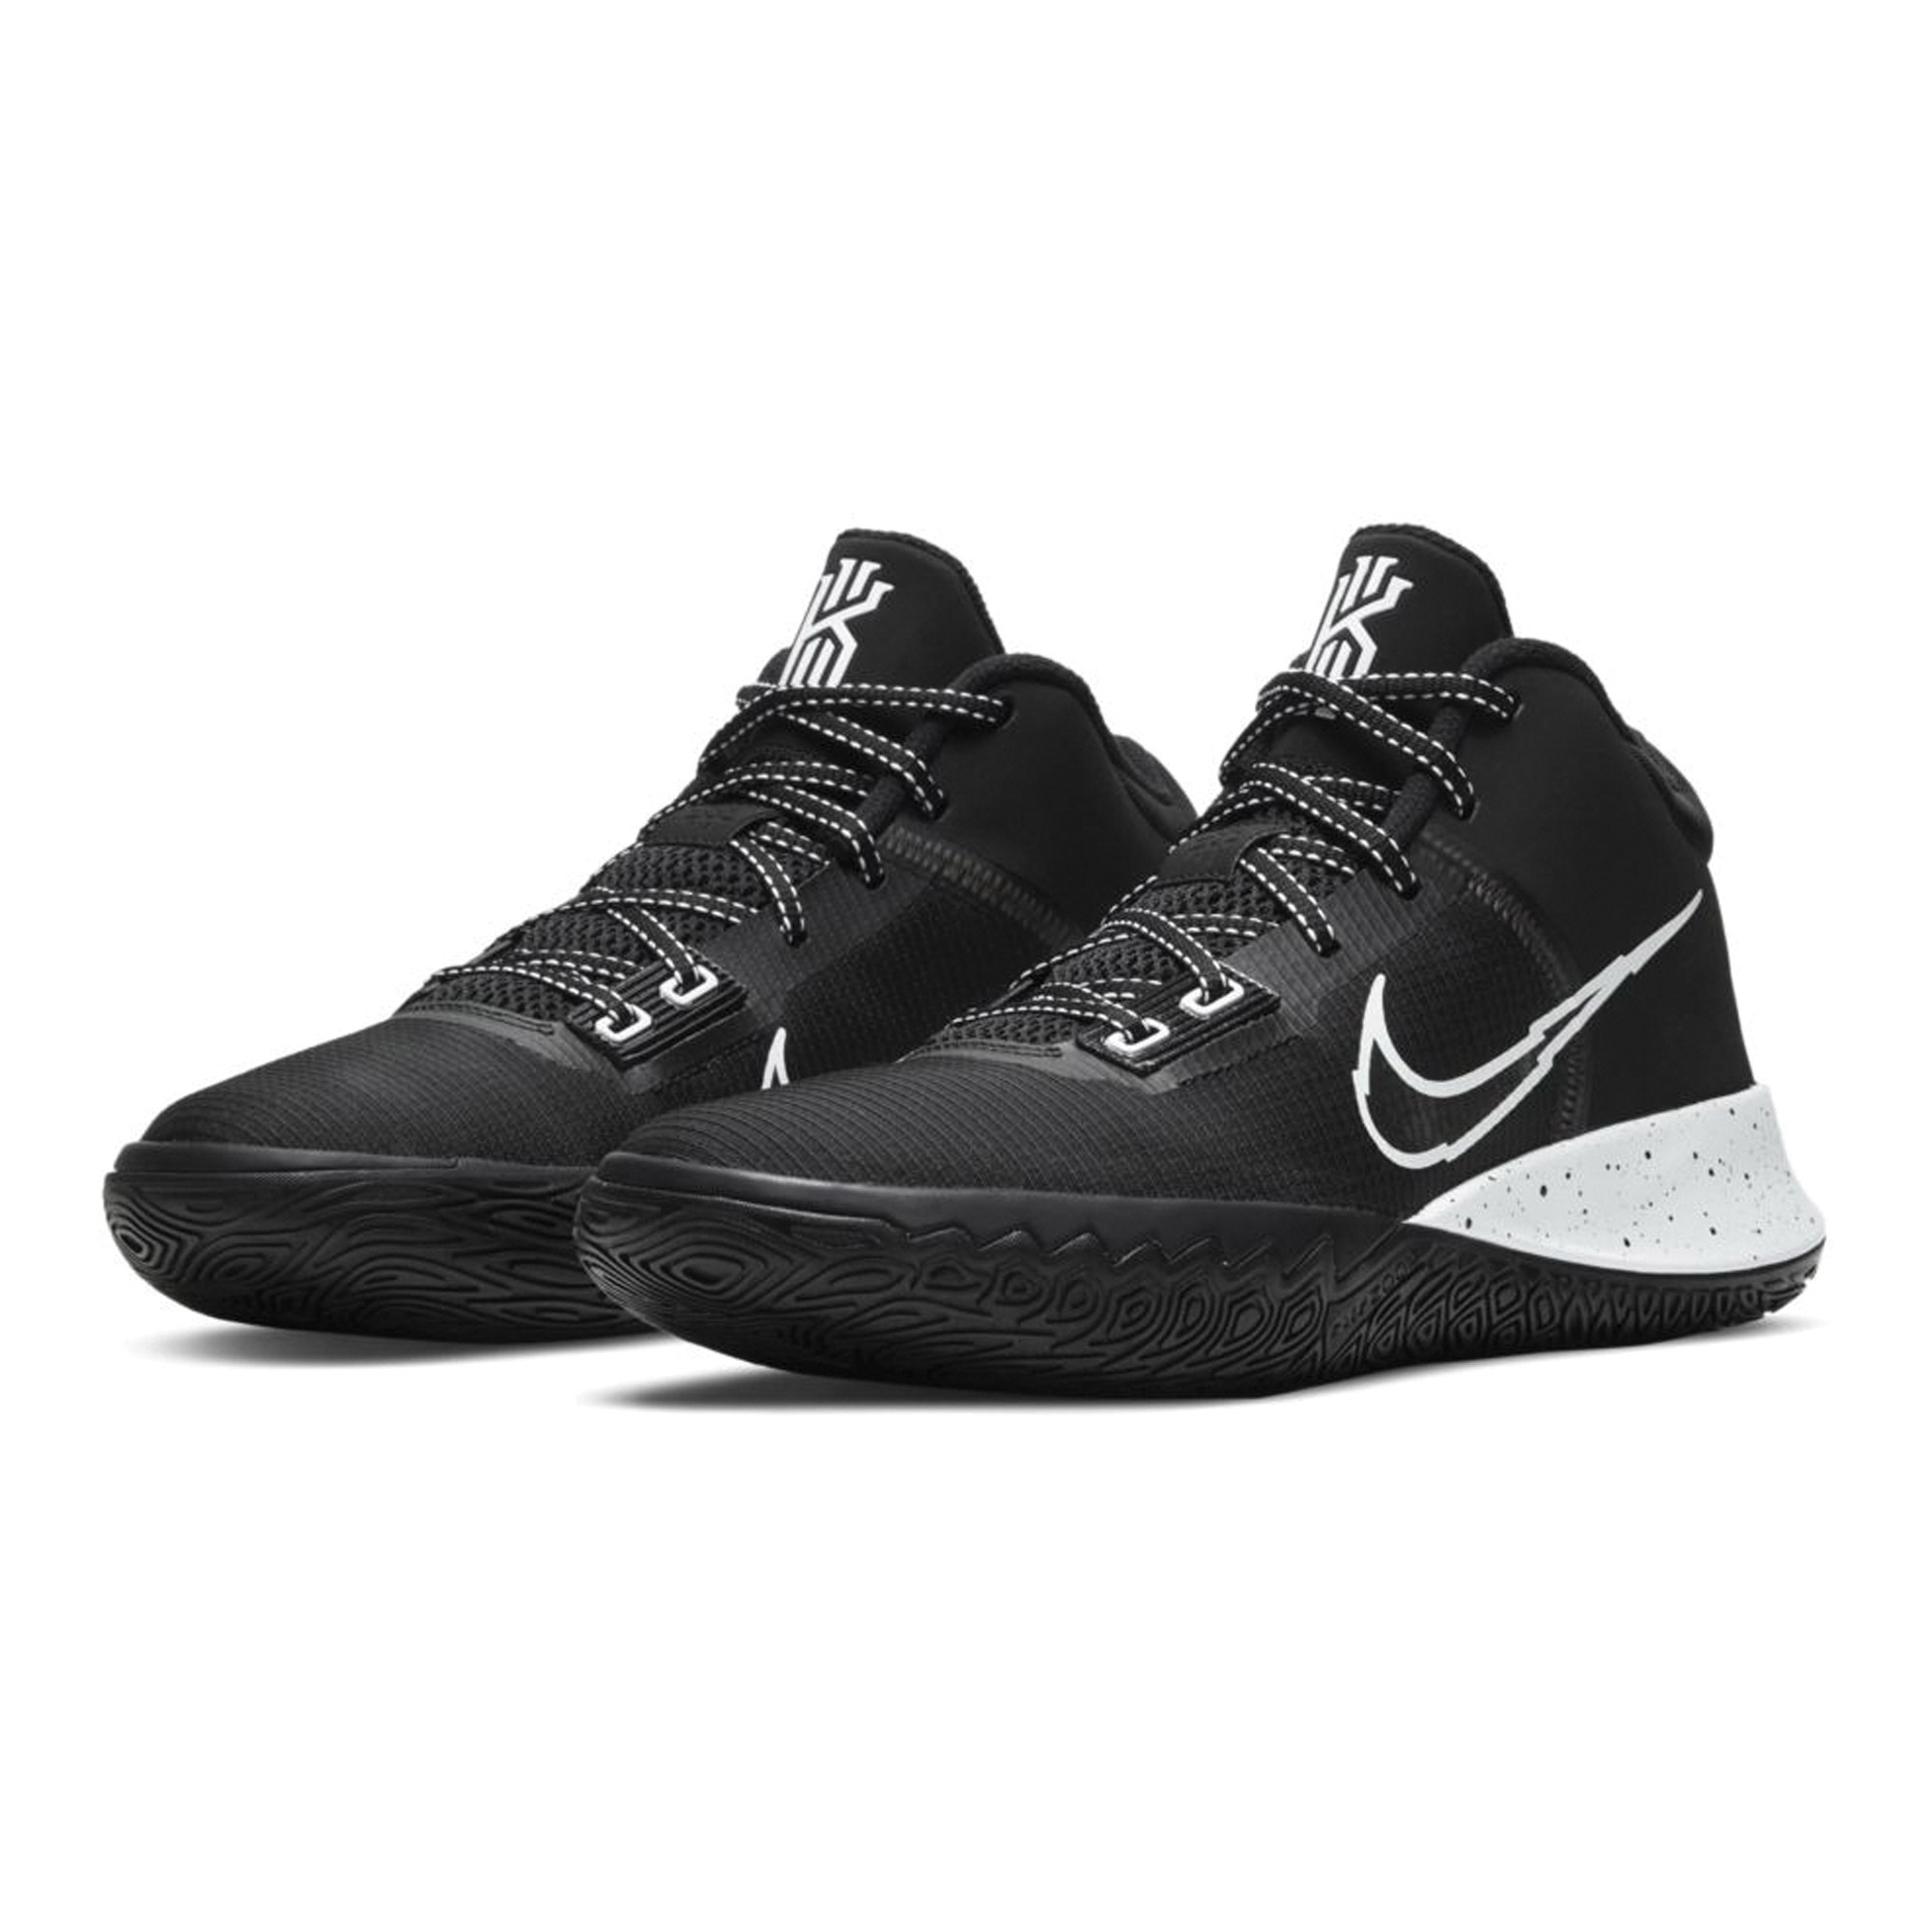 Chaussures de Basketball Nike Kyrie Flytrap 4 Homme